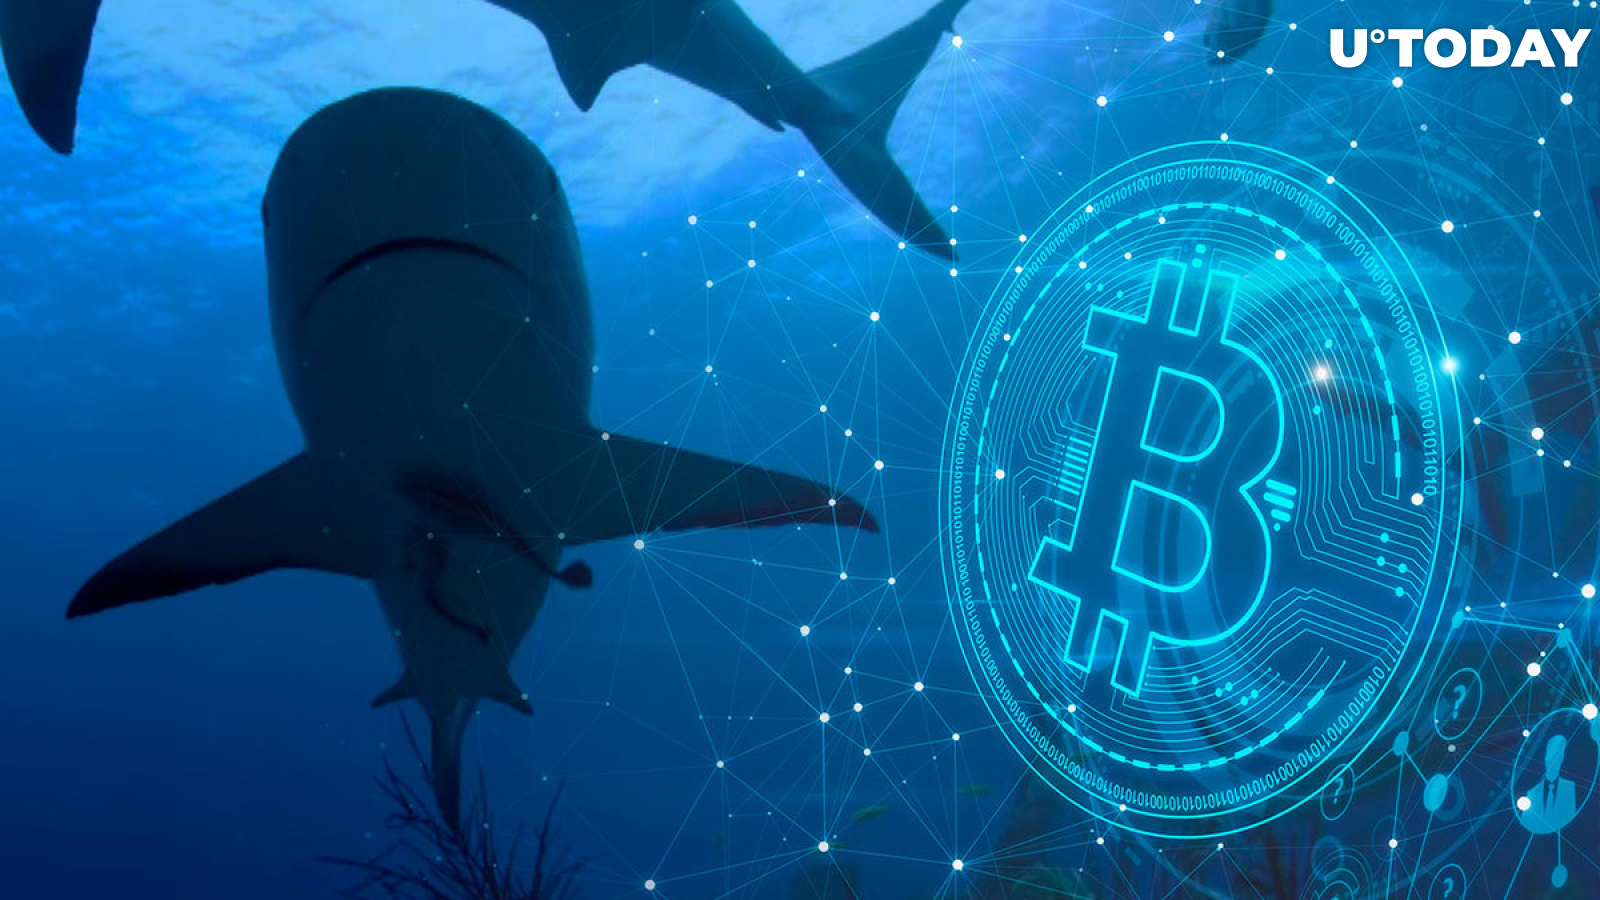 52,000 BTC Bought by Bitcoin Sharks Over Past Month: Report